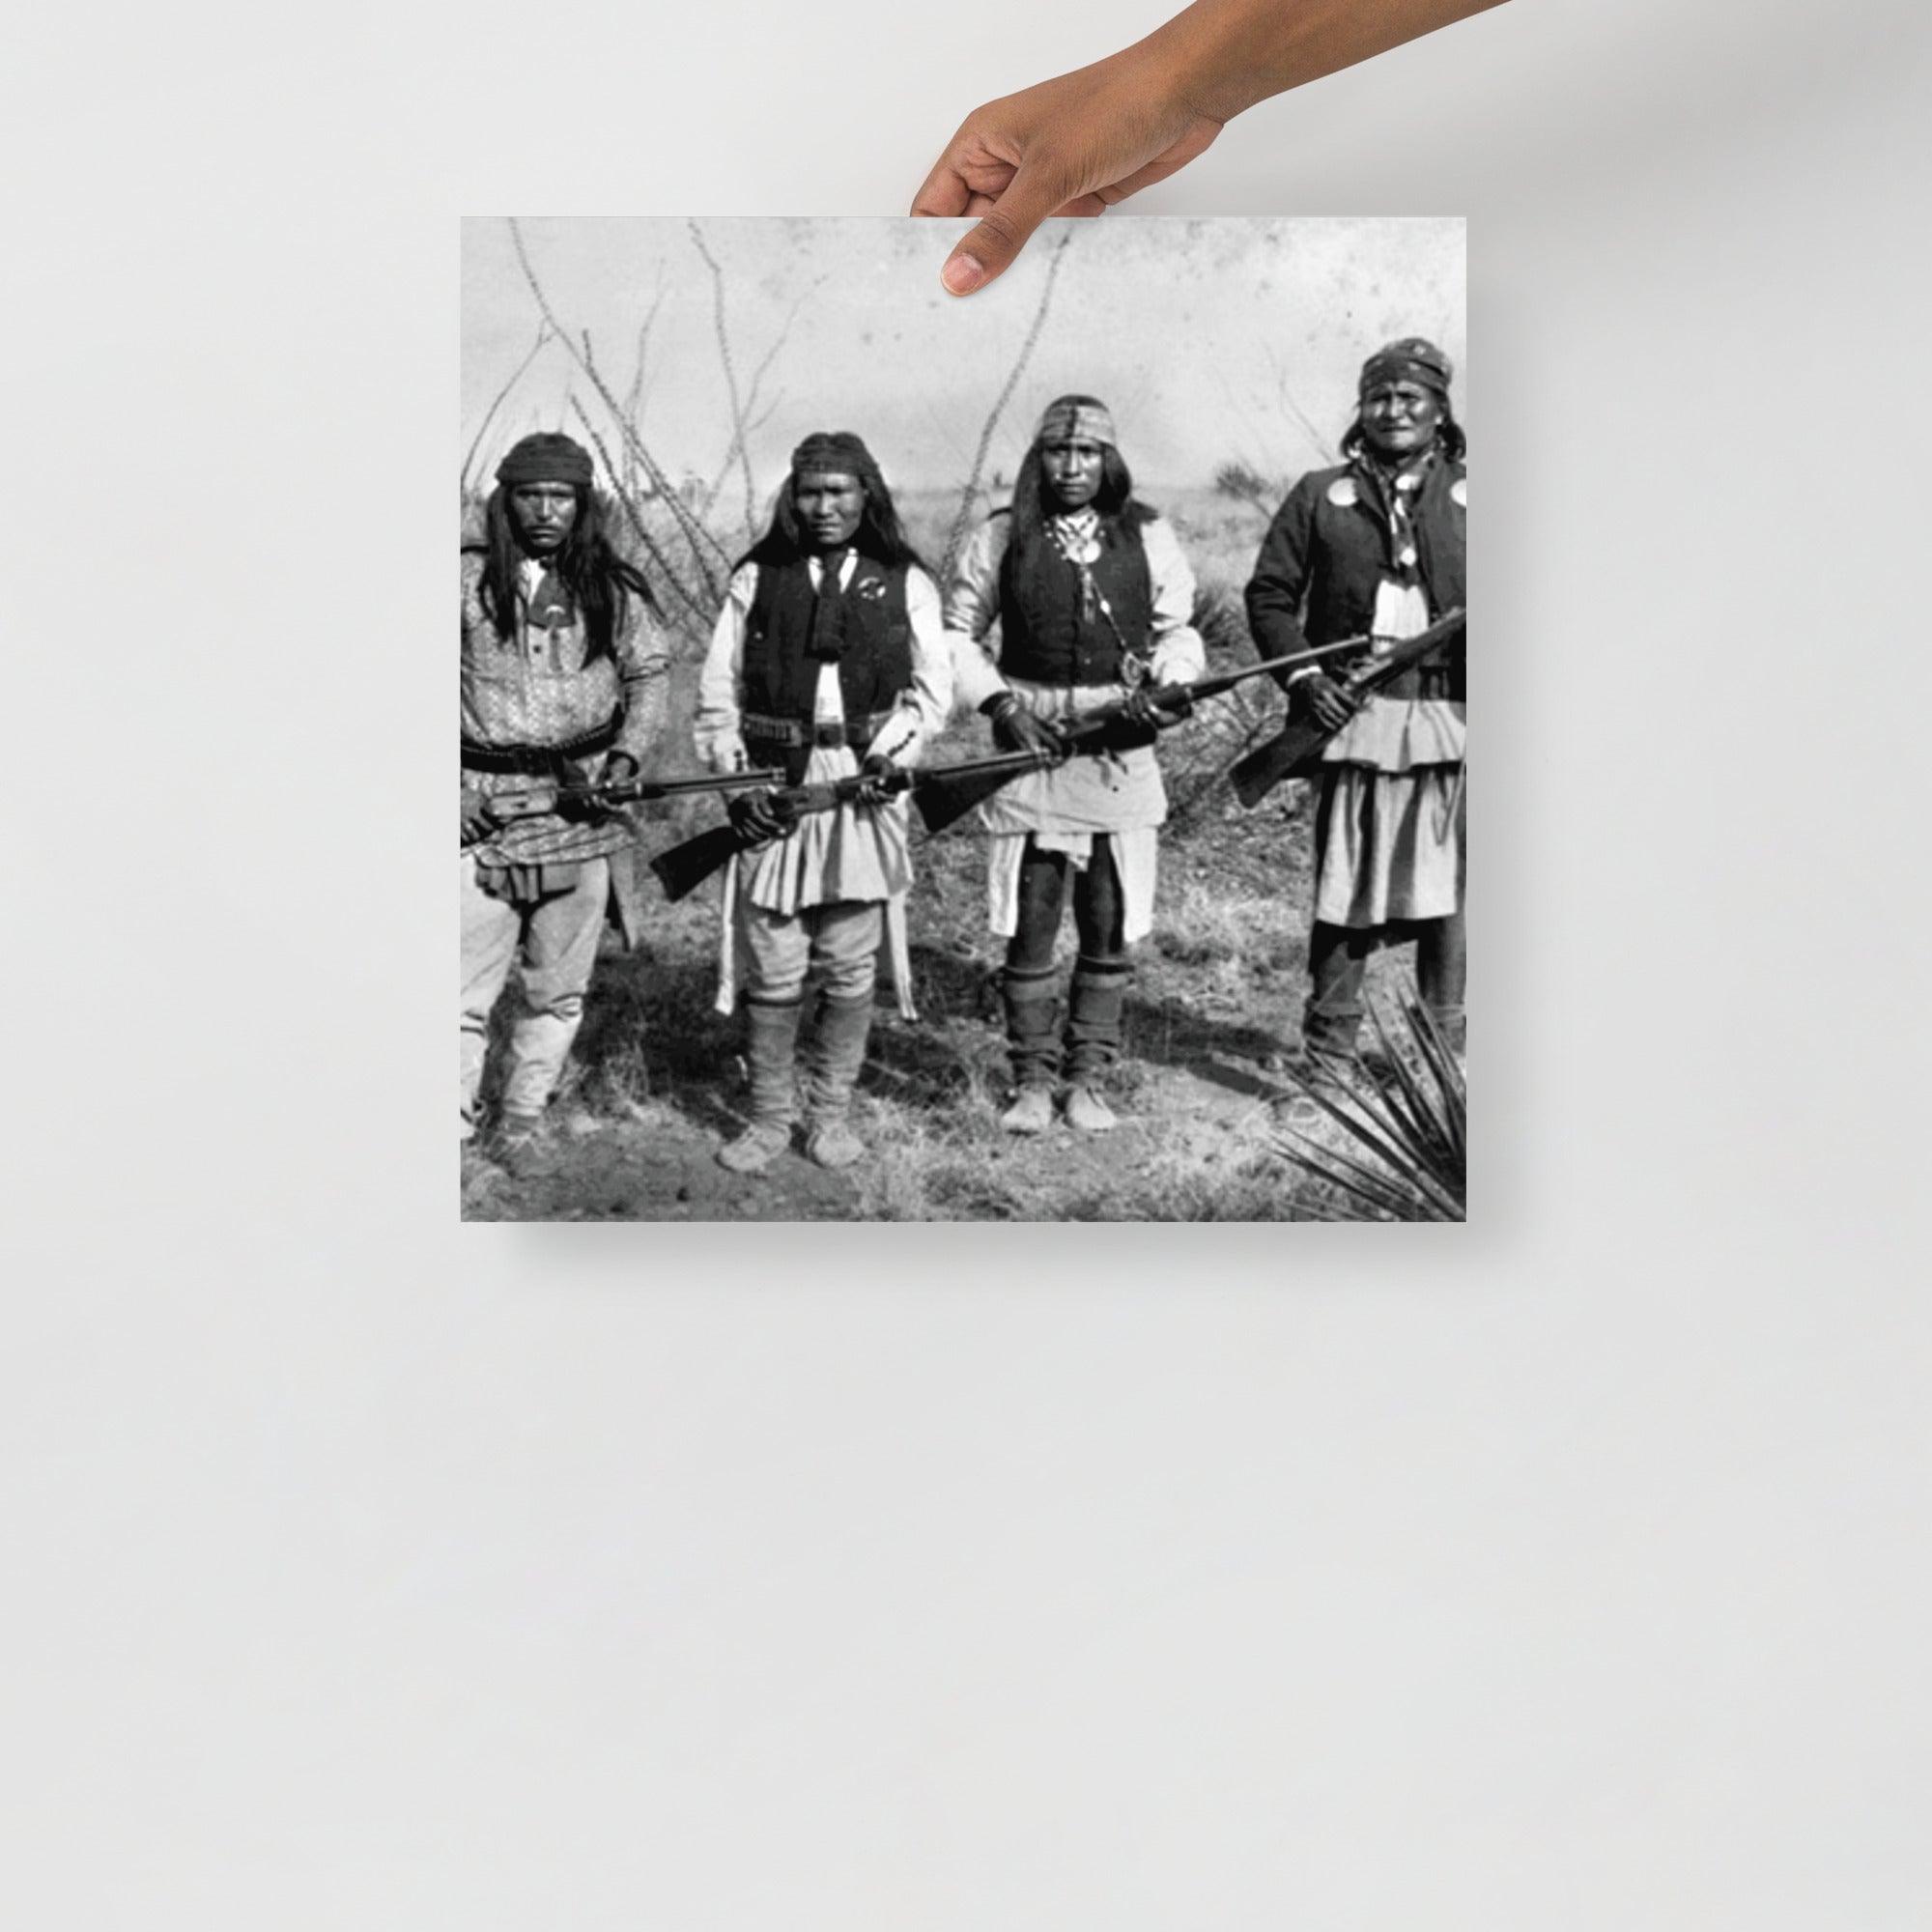 A Geronimo and His Warriors poster on a plain backdrop in size 18x18”.